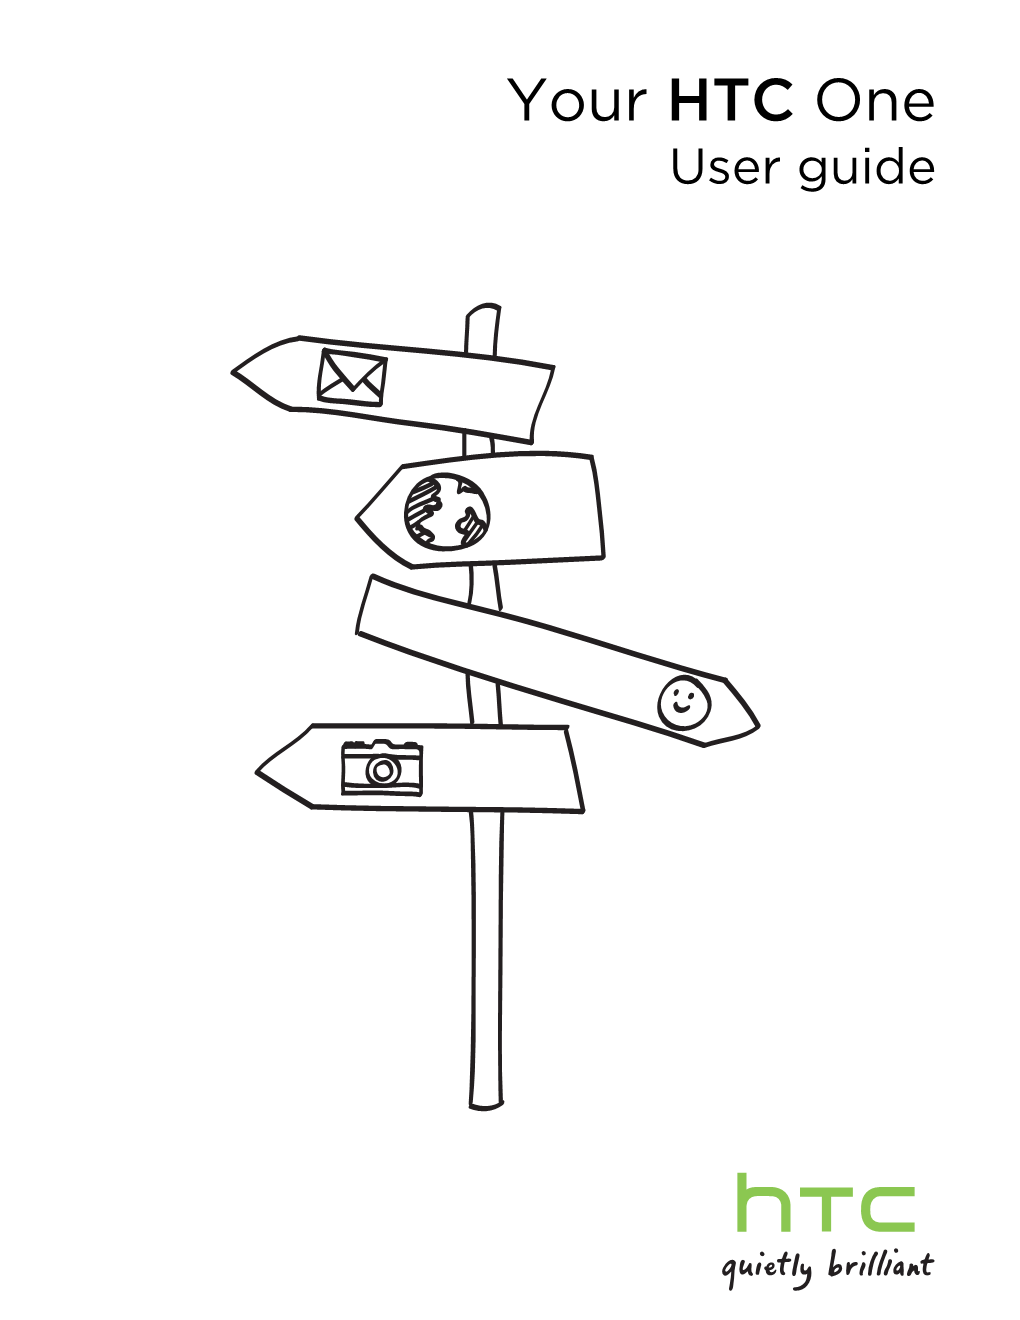 Your HTC One User Guide 2 Contents Contents